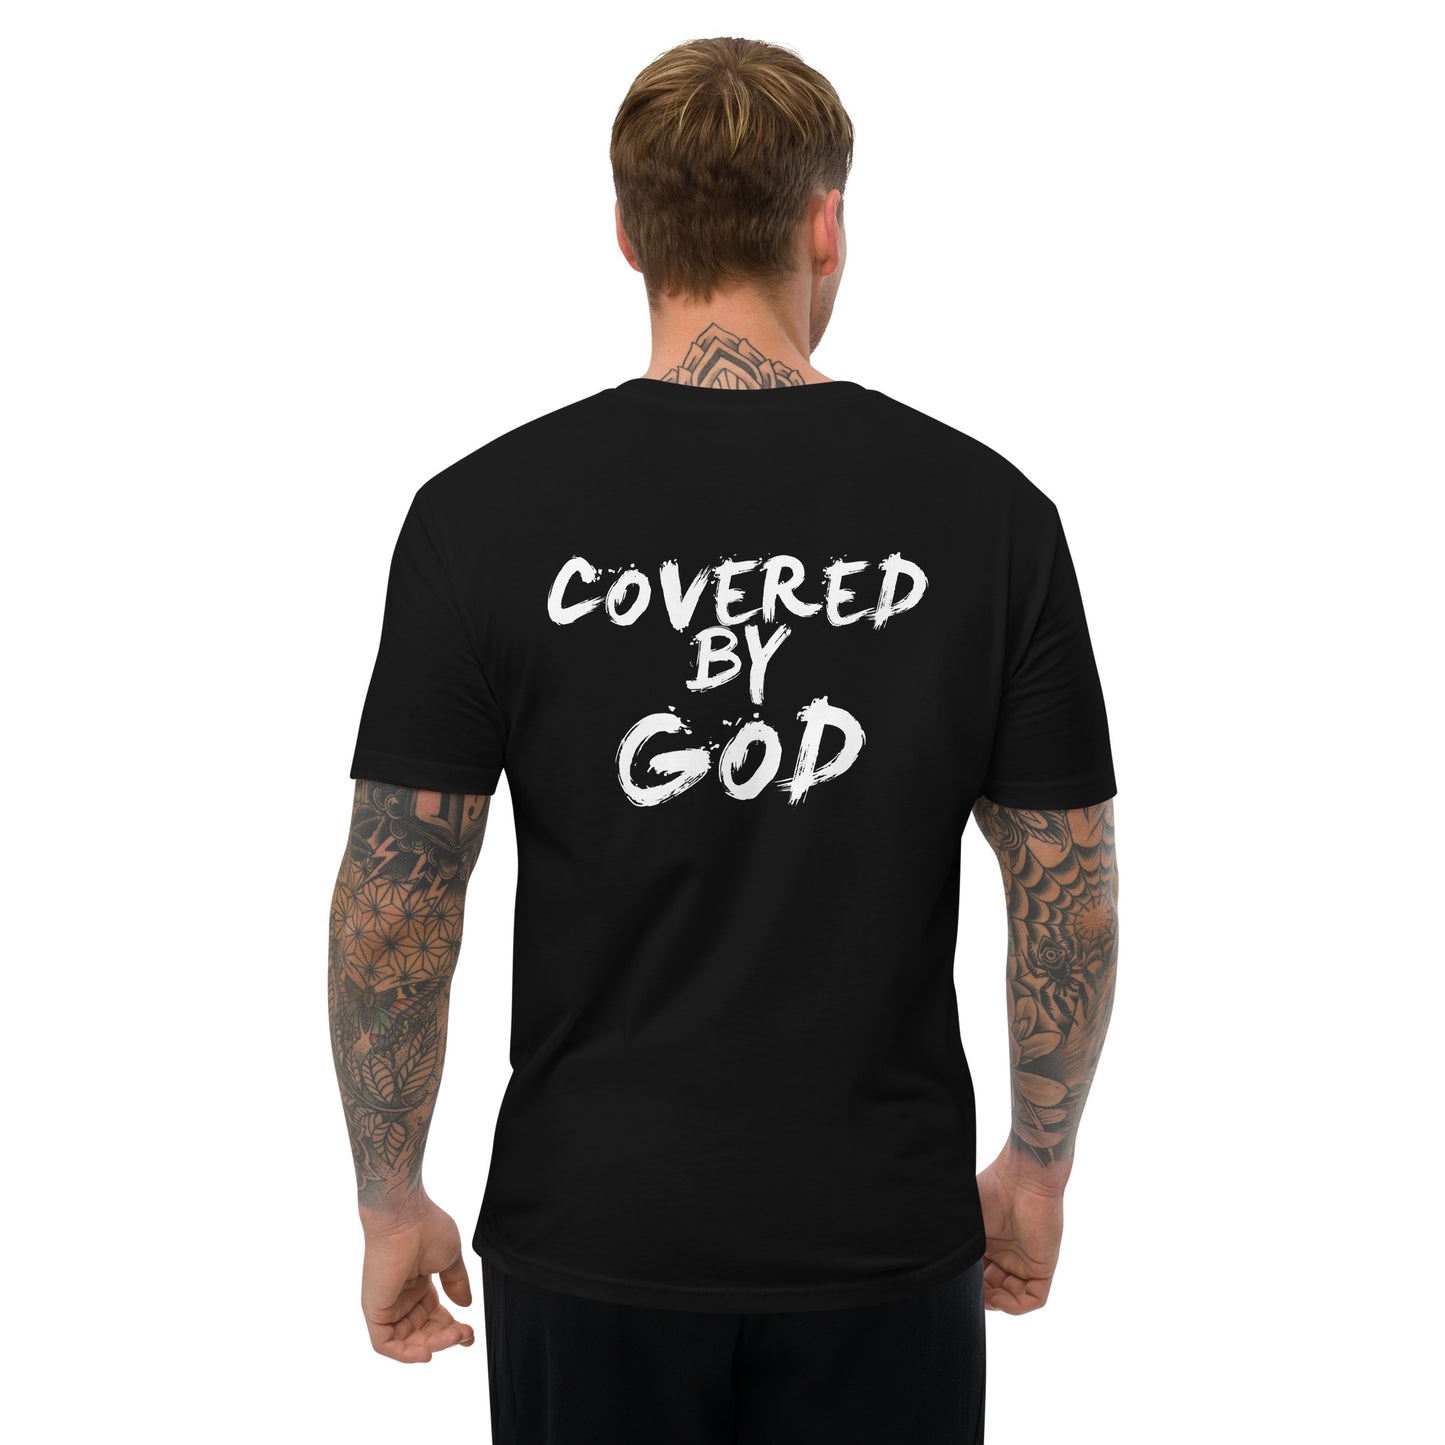 I'm Just Out Here Trusting God Black T-Shirt